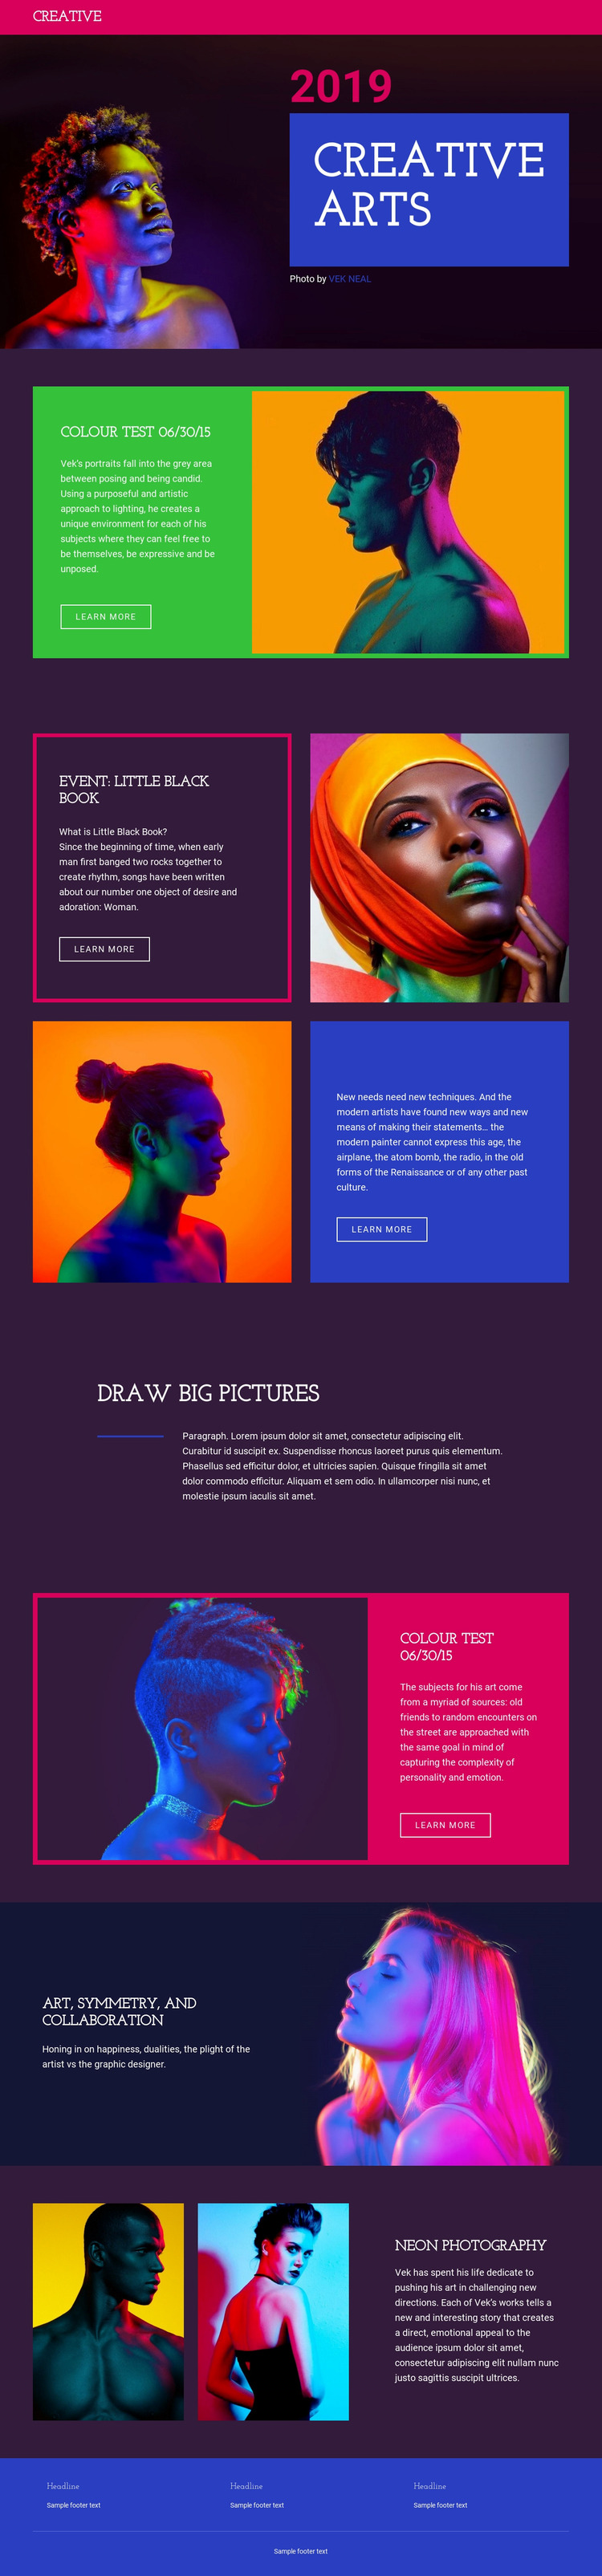 Limited-edition photography WordPress Website Builder